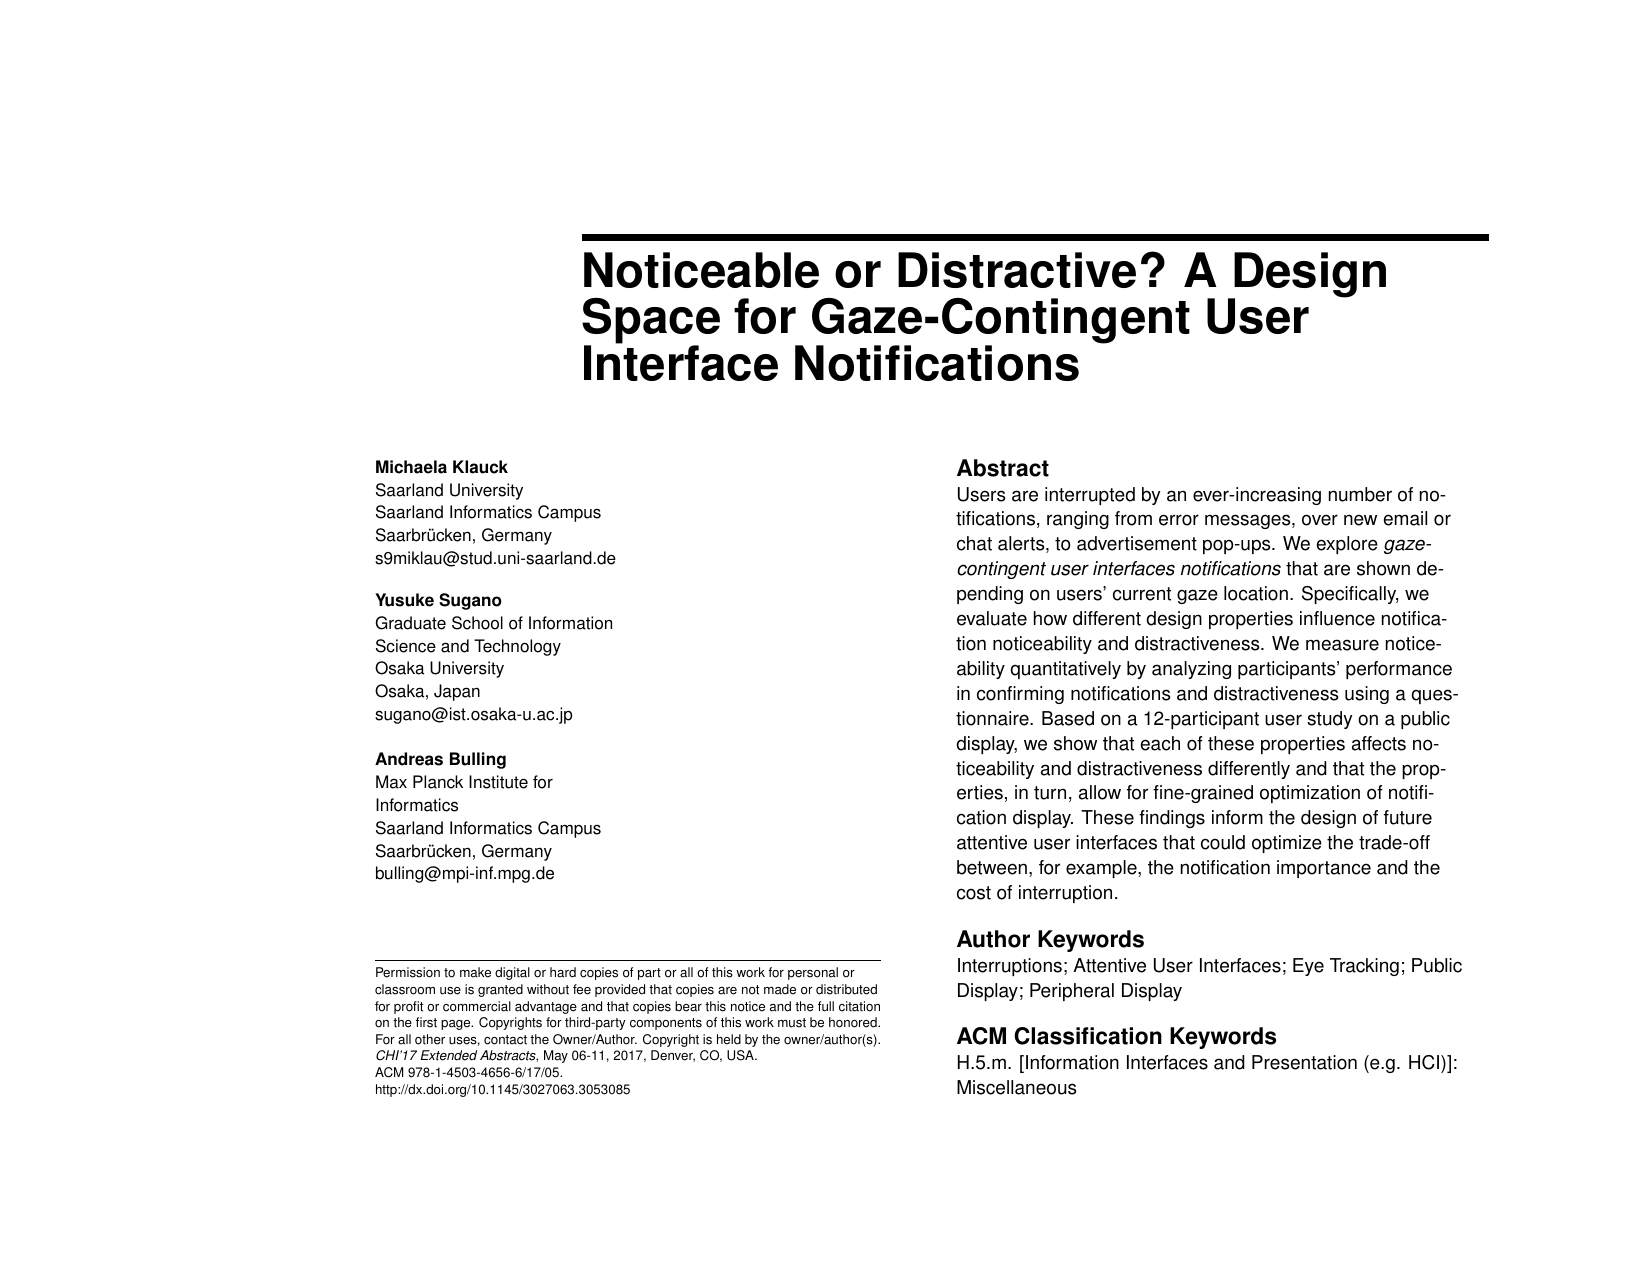 Noticeable or Distractive? A Design Space for Gaze-Contingent User Interface Notifications